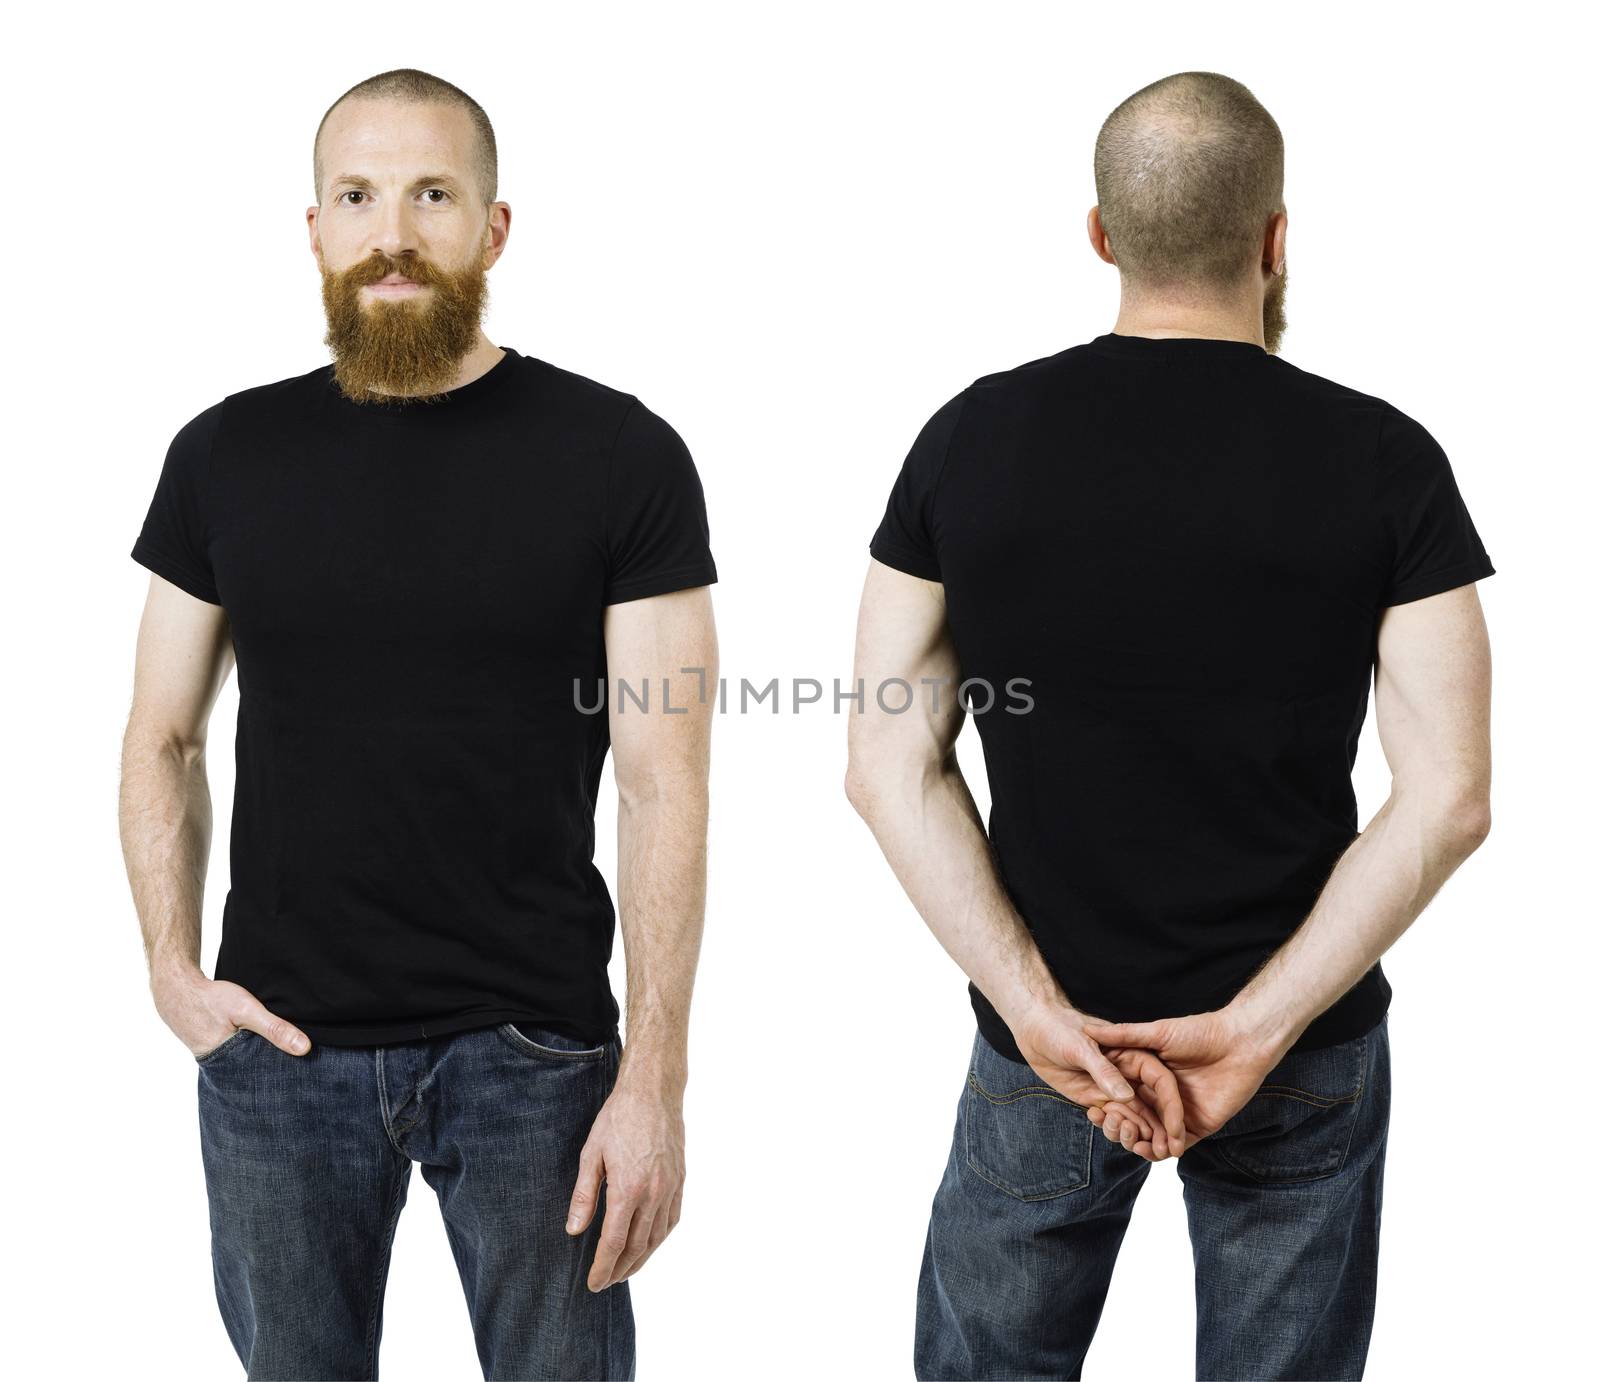 Photo of a man with a beard and wearing a blank black t-shirt, front and back. Ready for your design or artwork.